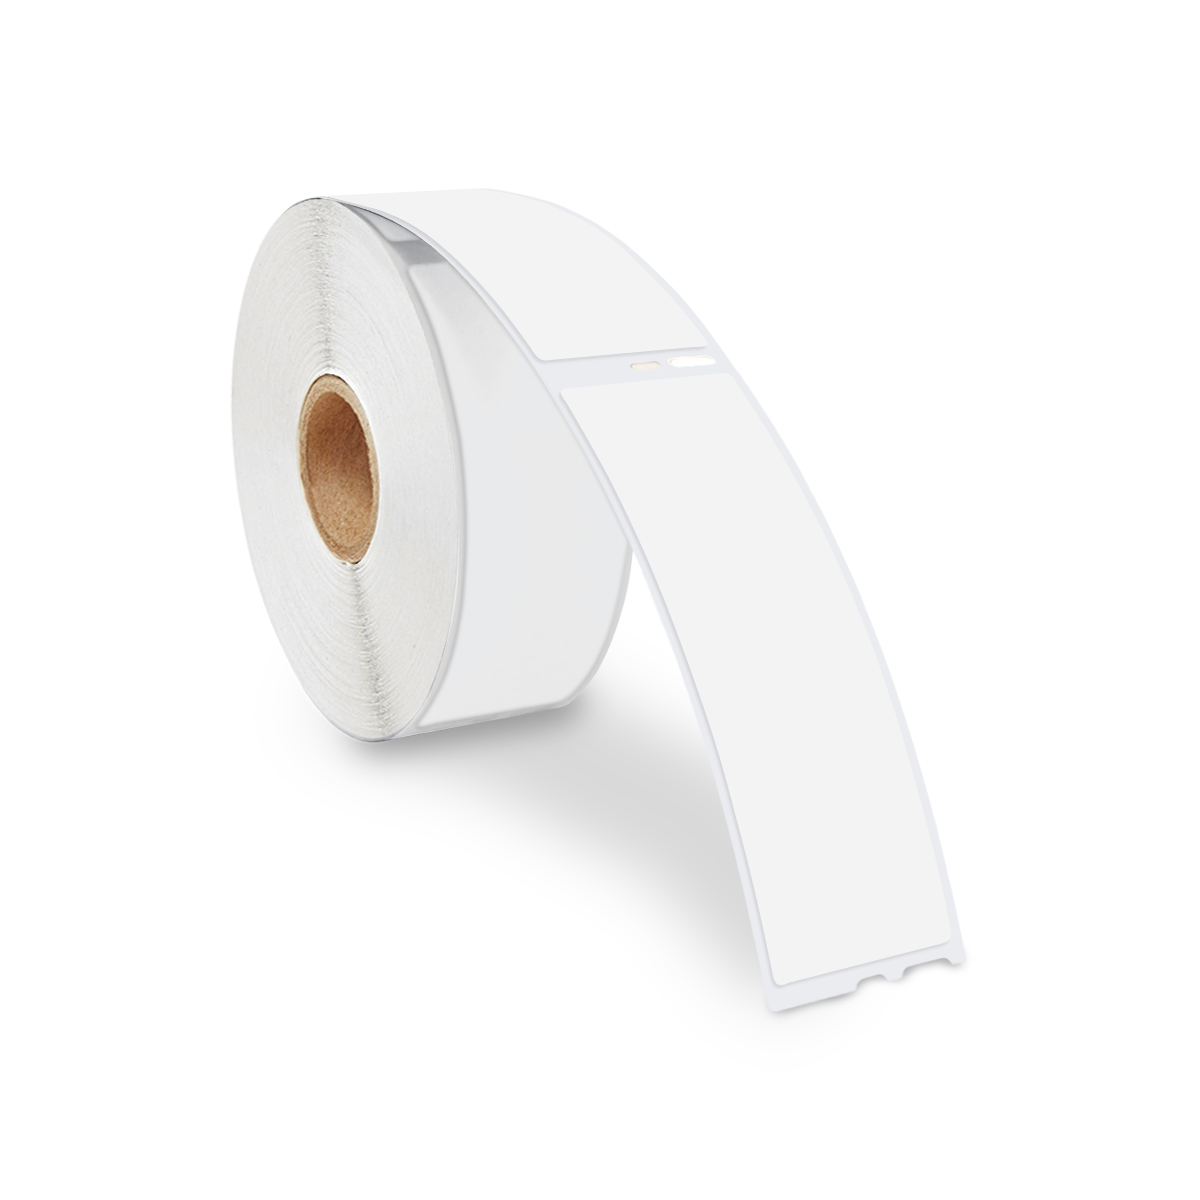 Same Size as Dymo 30252 4150 1-1/8 x 3-1/2 2 Rolls of 130 White Avery Labels for Dymo Label Printers 